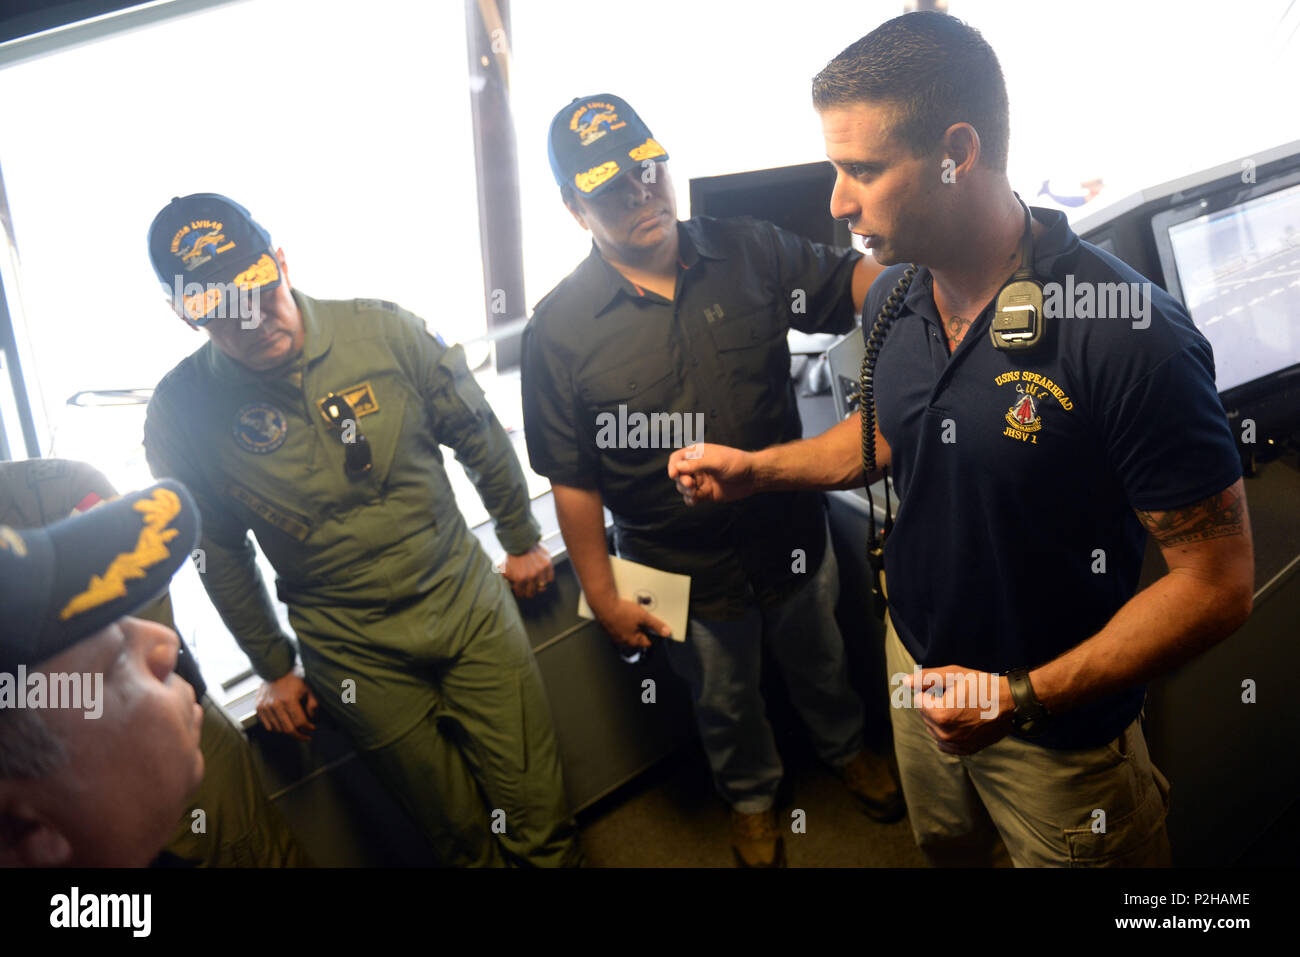 GULF OF PANAMA (Sept. 24, 2016) - USNS Spearhead (T-EPF 1) Chief Mate Adam Steeper gives a tour of the ship to Belsio González Director General Servicio Nacional Aeronaval, Alexis Bethancourt Yau, Panama Minister of Security and other guests during UNITAS 2016. UNITAS is an annual multi-national exercise that focuses on strengthening our existing regional partnerships and encourages establishing new relationships through the exchange of maritime mission-focused knowledge and expertise throughout the exercise. (U.S. Navy Photo by Mass Communication Specialist 1st Class Jacob Sippel) Stock Photo